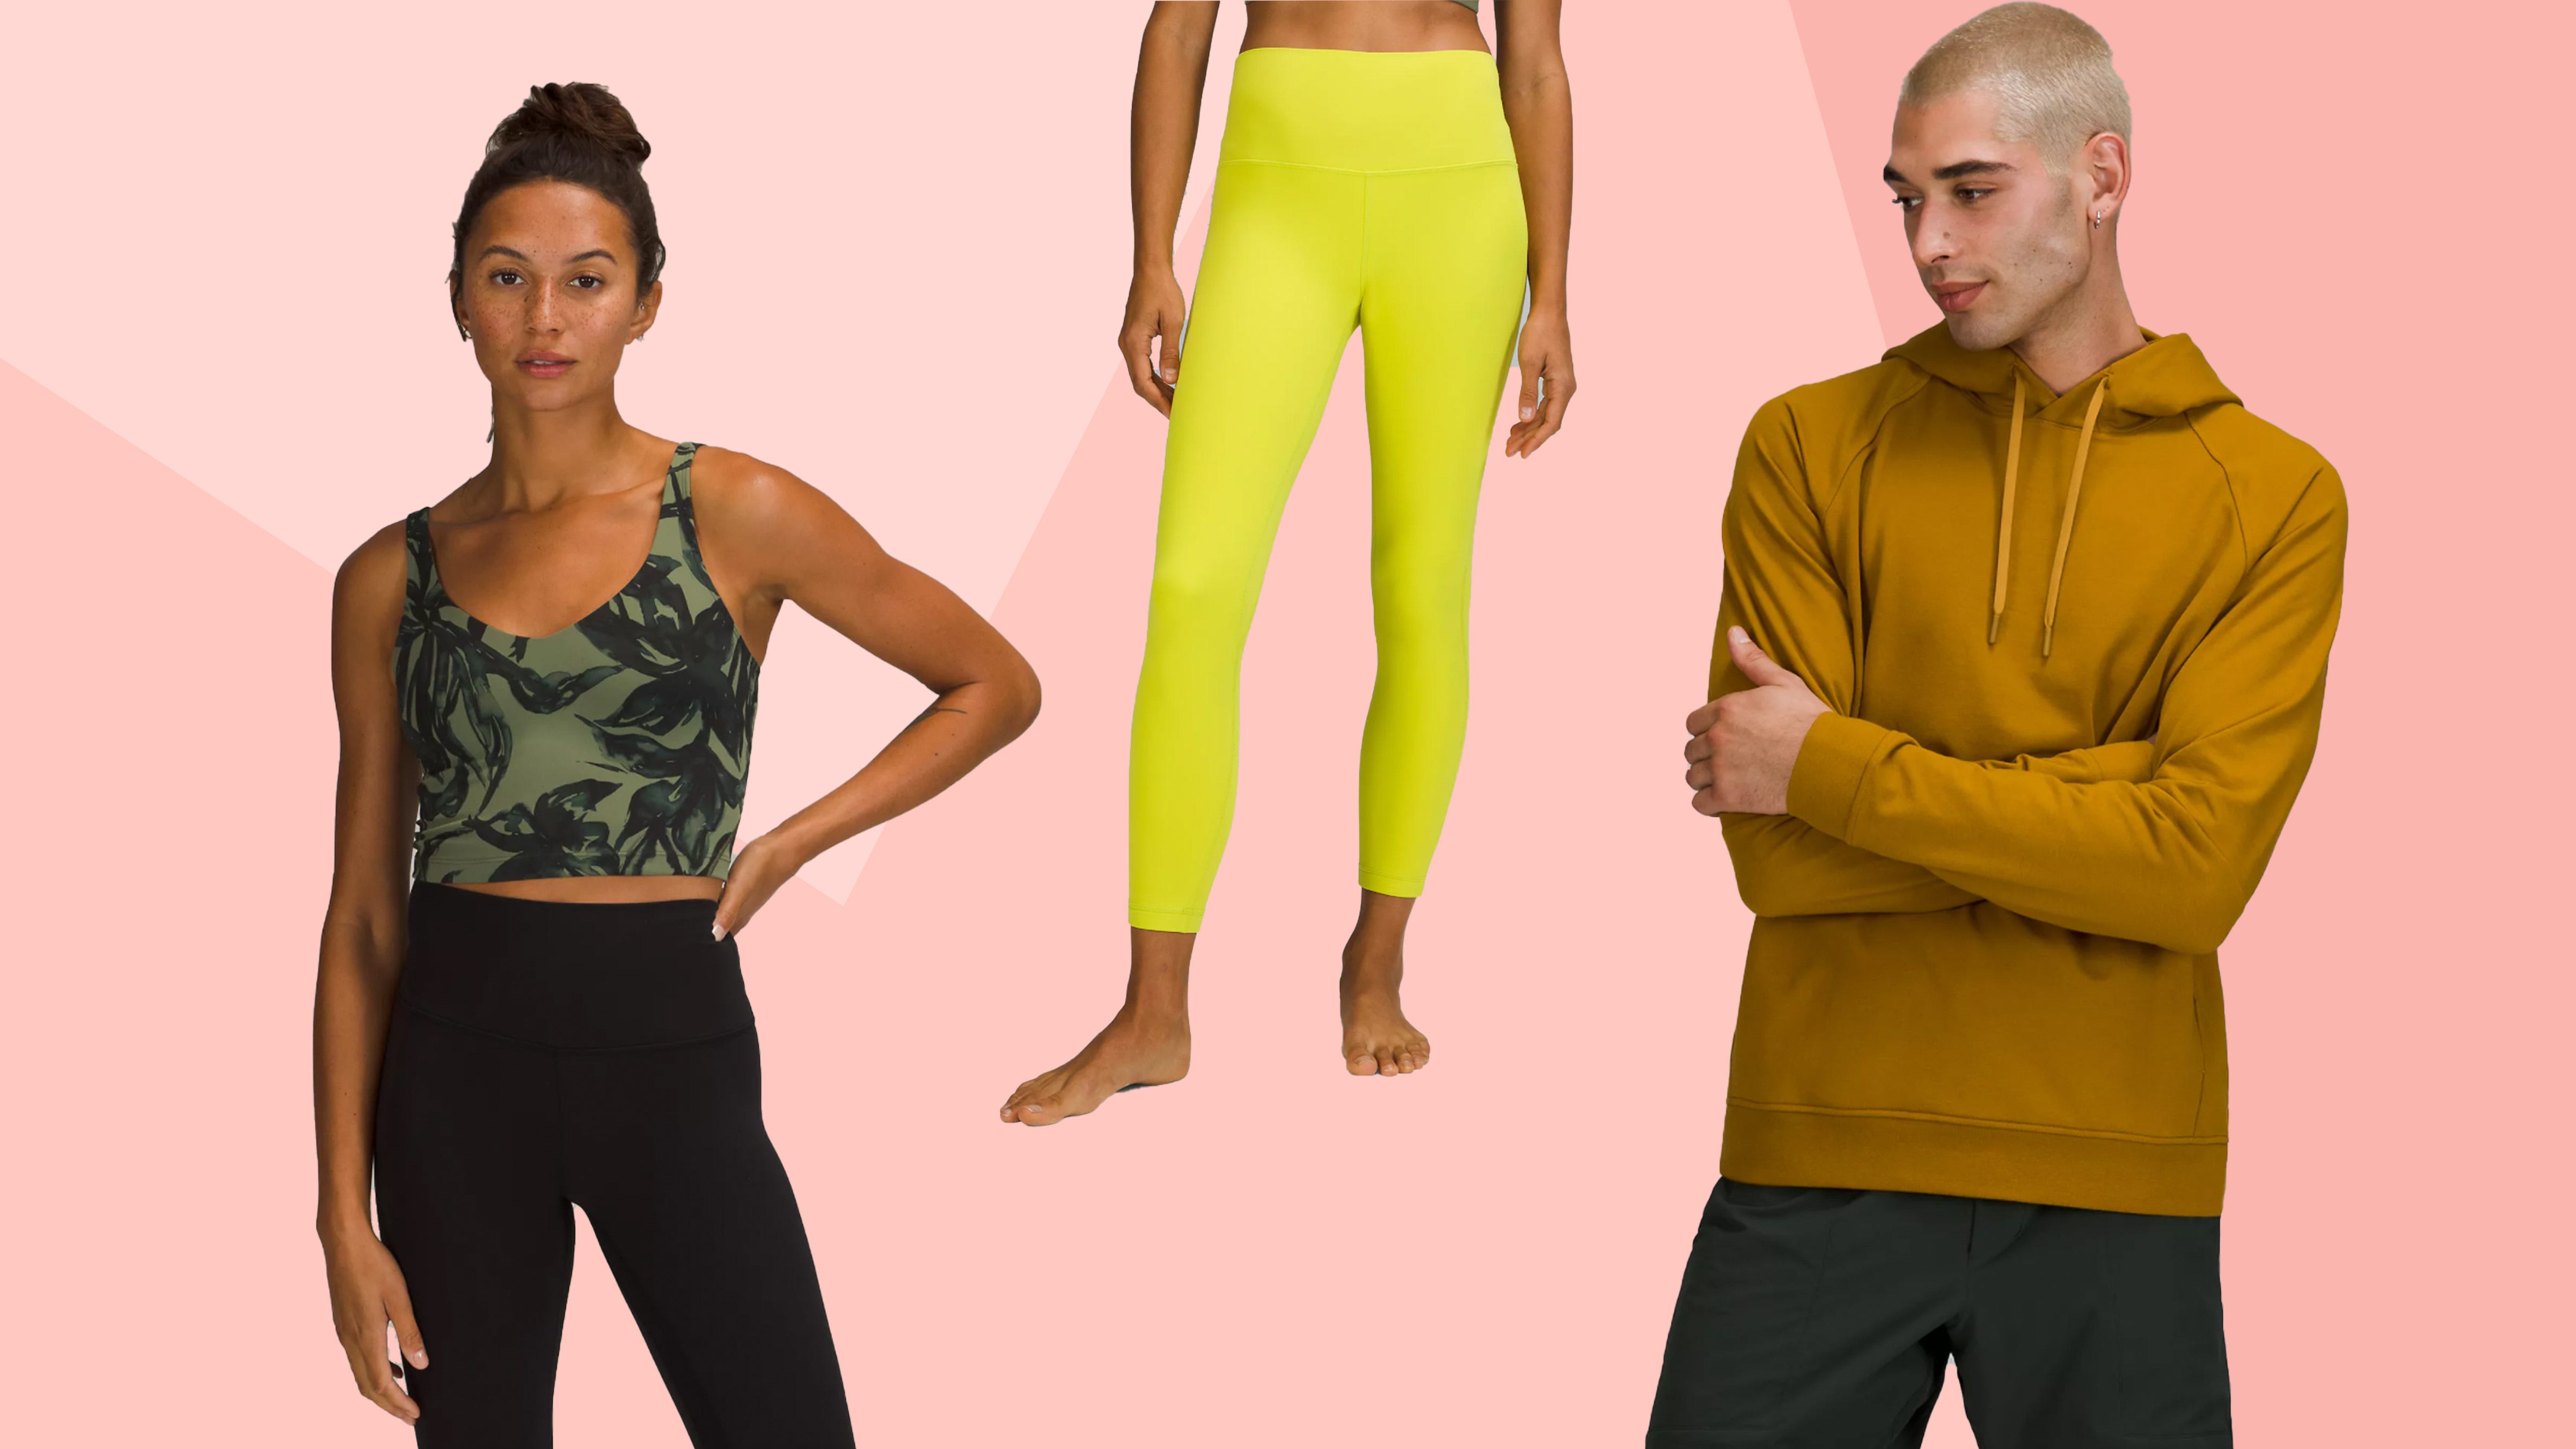 lululemon leggings are an epic gift and right now you can get a pair for a great deal